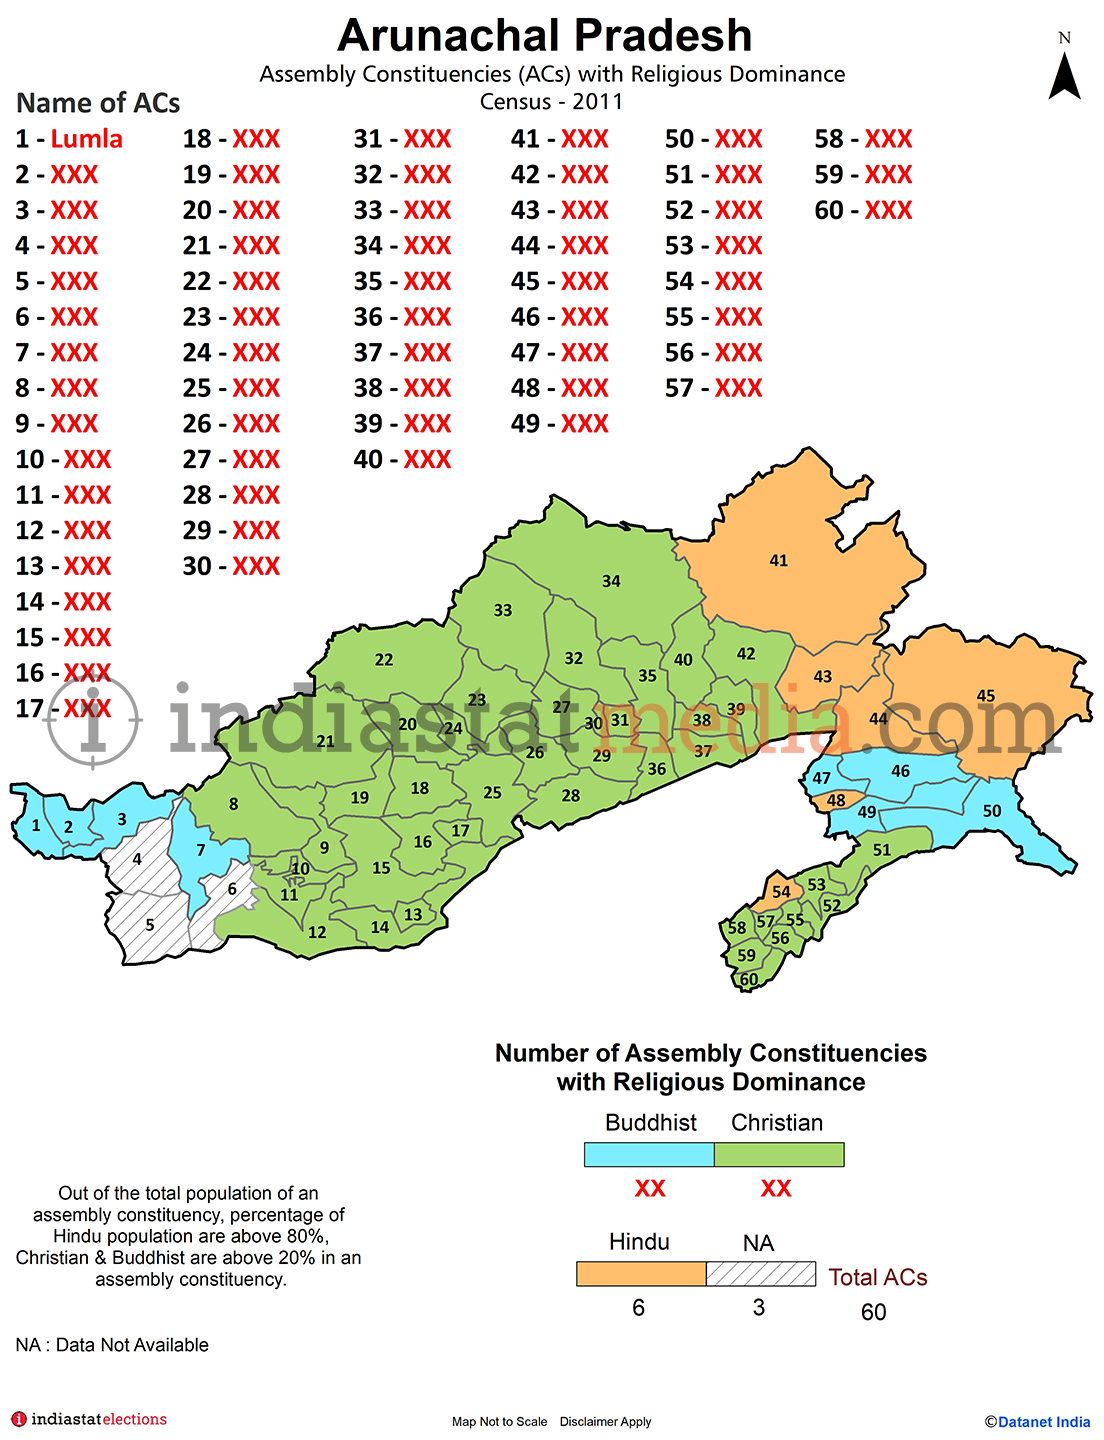 Assembly Constituencies (ACs) with Religious Dominance in Arunachal Pradesh - Census 2011